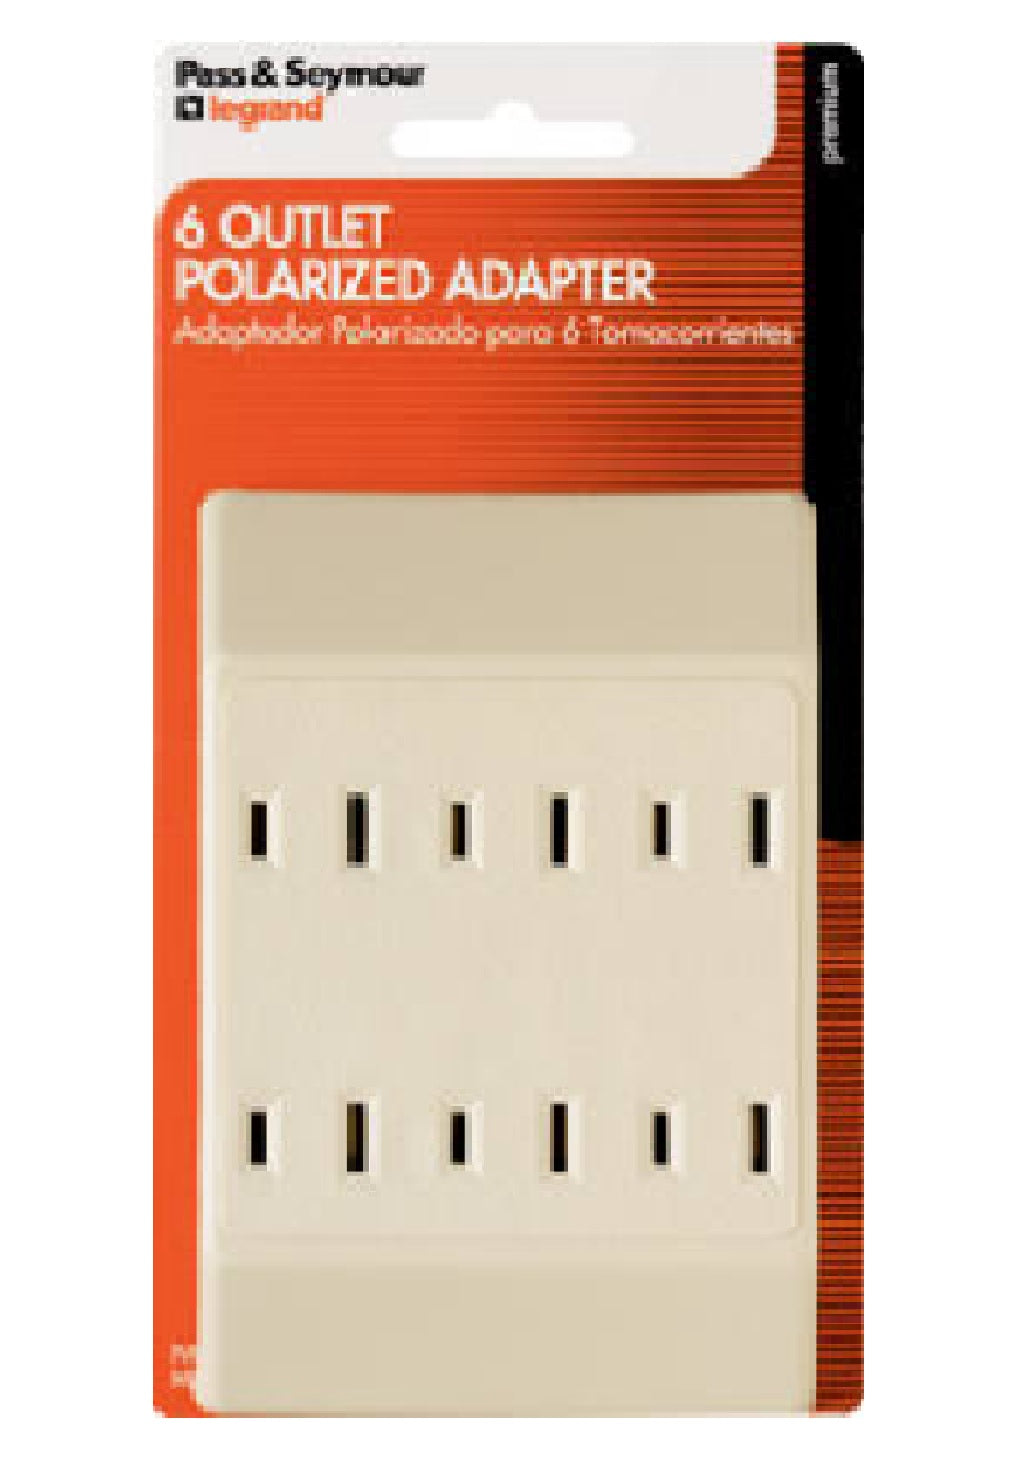 Pass & Seymour 6-Outlet Polarized Adapter, 15A, 125V, Ivory